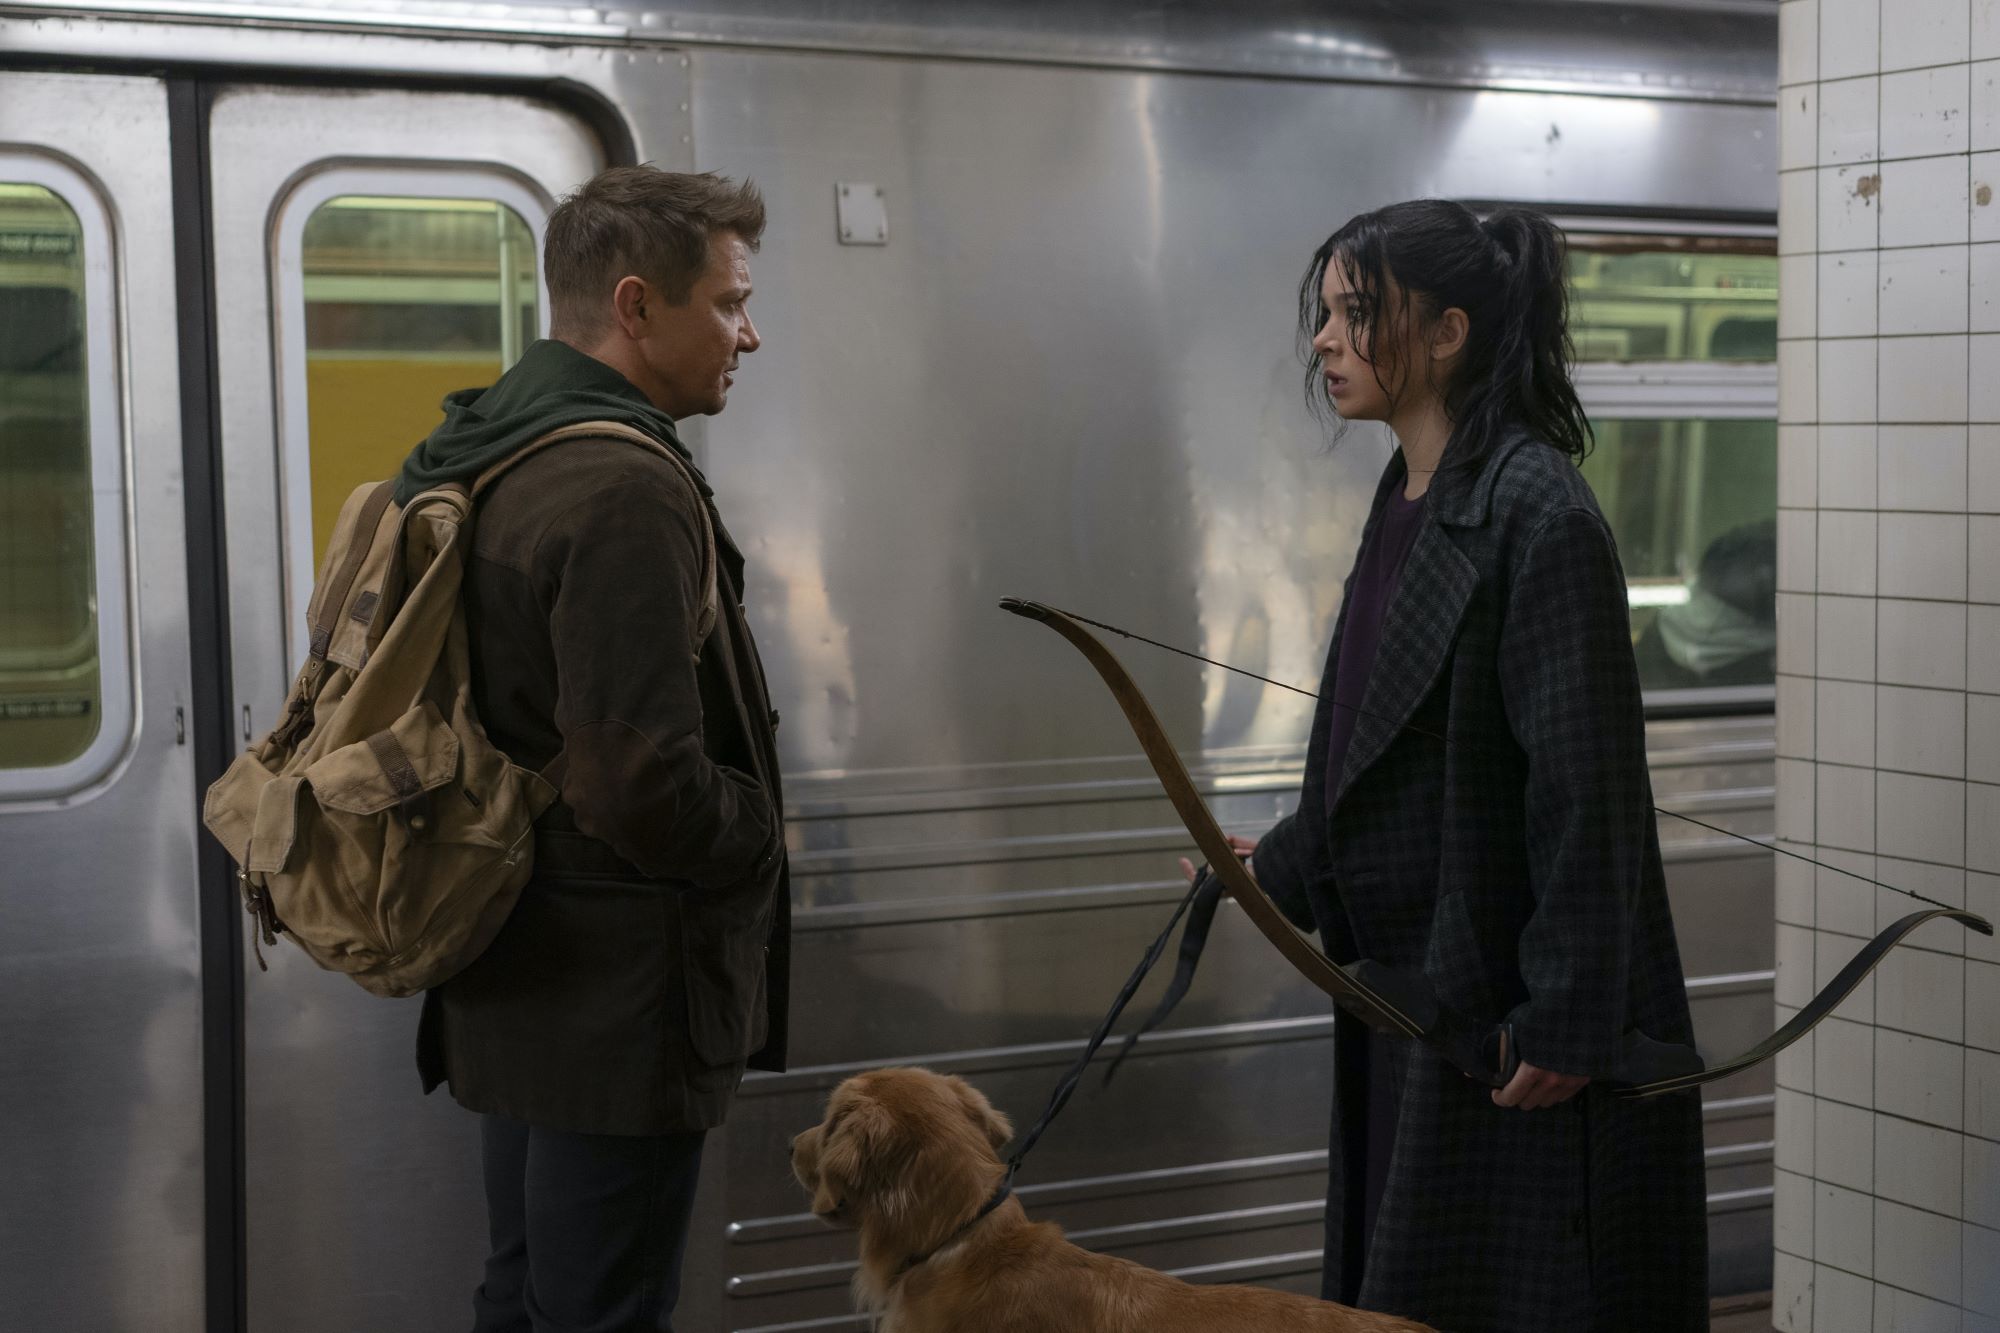 'Hawkeye' stars Jeremy Renner and Hailee Steinfeld, in character as Clint Barton and Kate Bishop, stand in a subway tunnel as a train goes by. Clint wears a brown coat over a green hoodie and dark pants, and a tan backpack is slung over his shoulders. Kate wears an oversized dark plaid coat over a purple sweater, and she is holding a bow and a leash attached to her golden retriever.